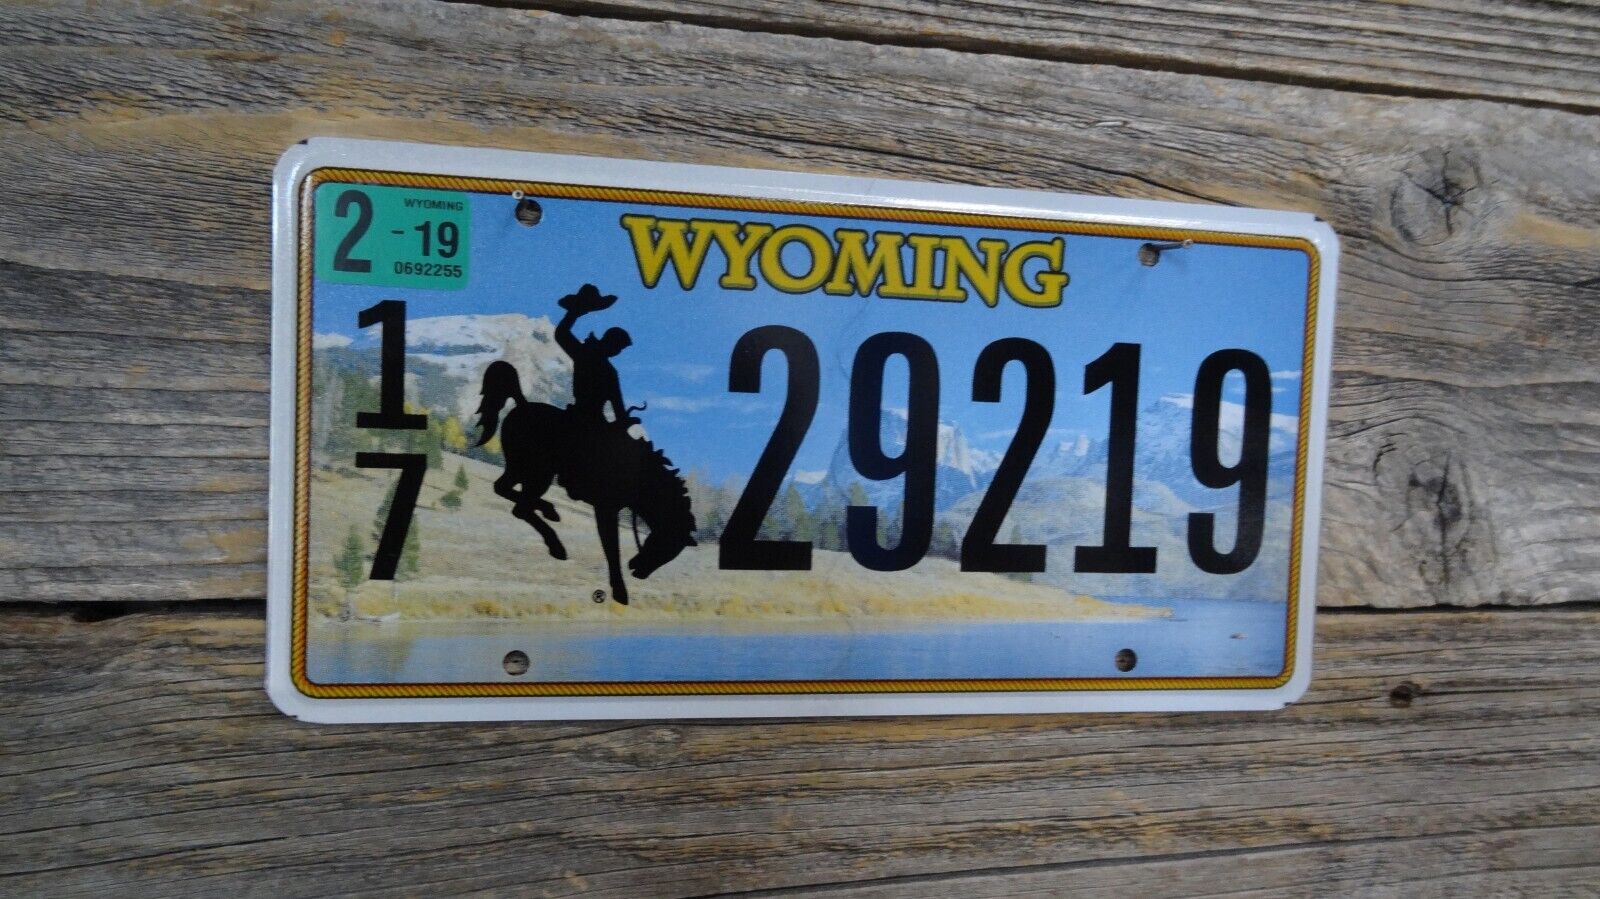 Wyoming Passenger new issue font license plate with bucking horse Wyoming plate